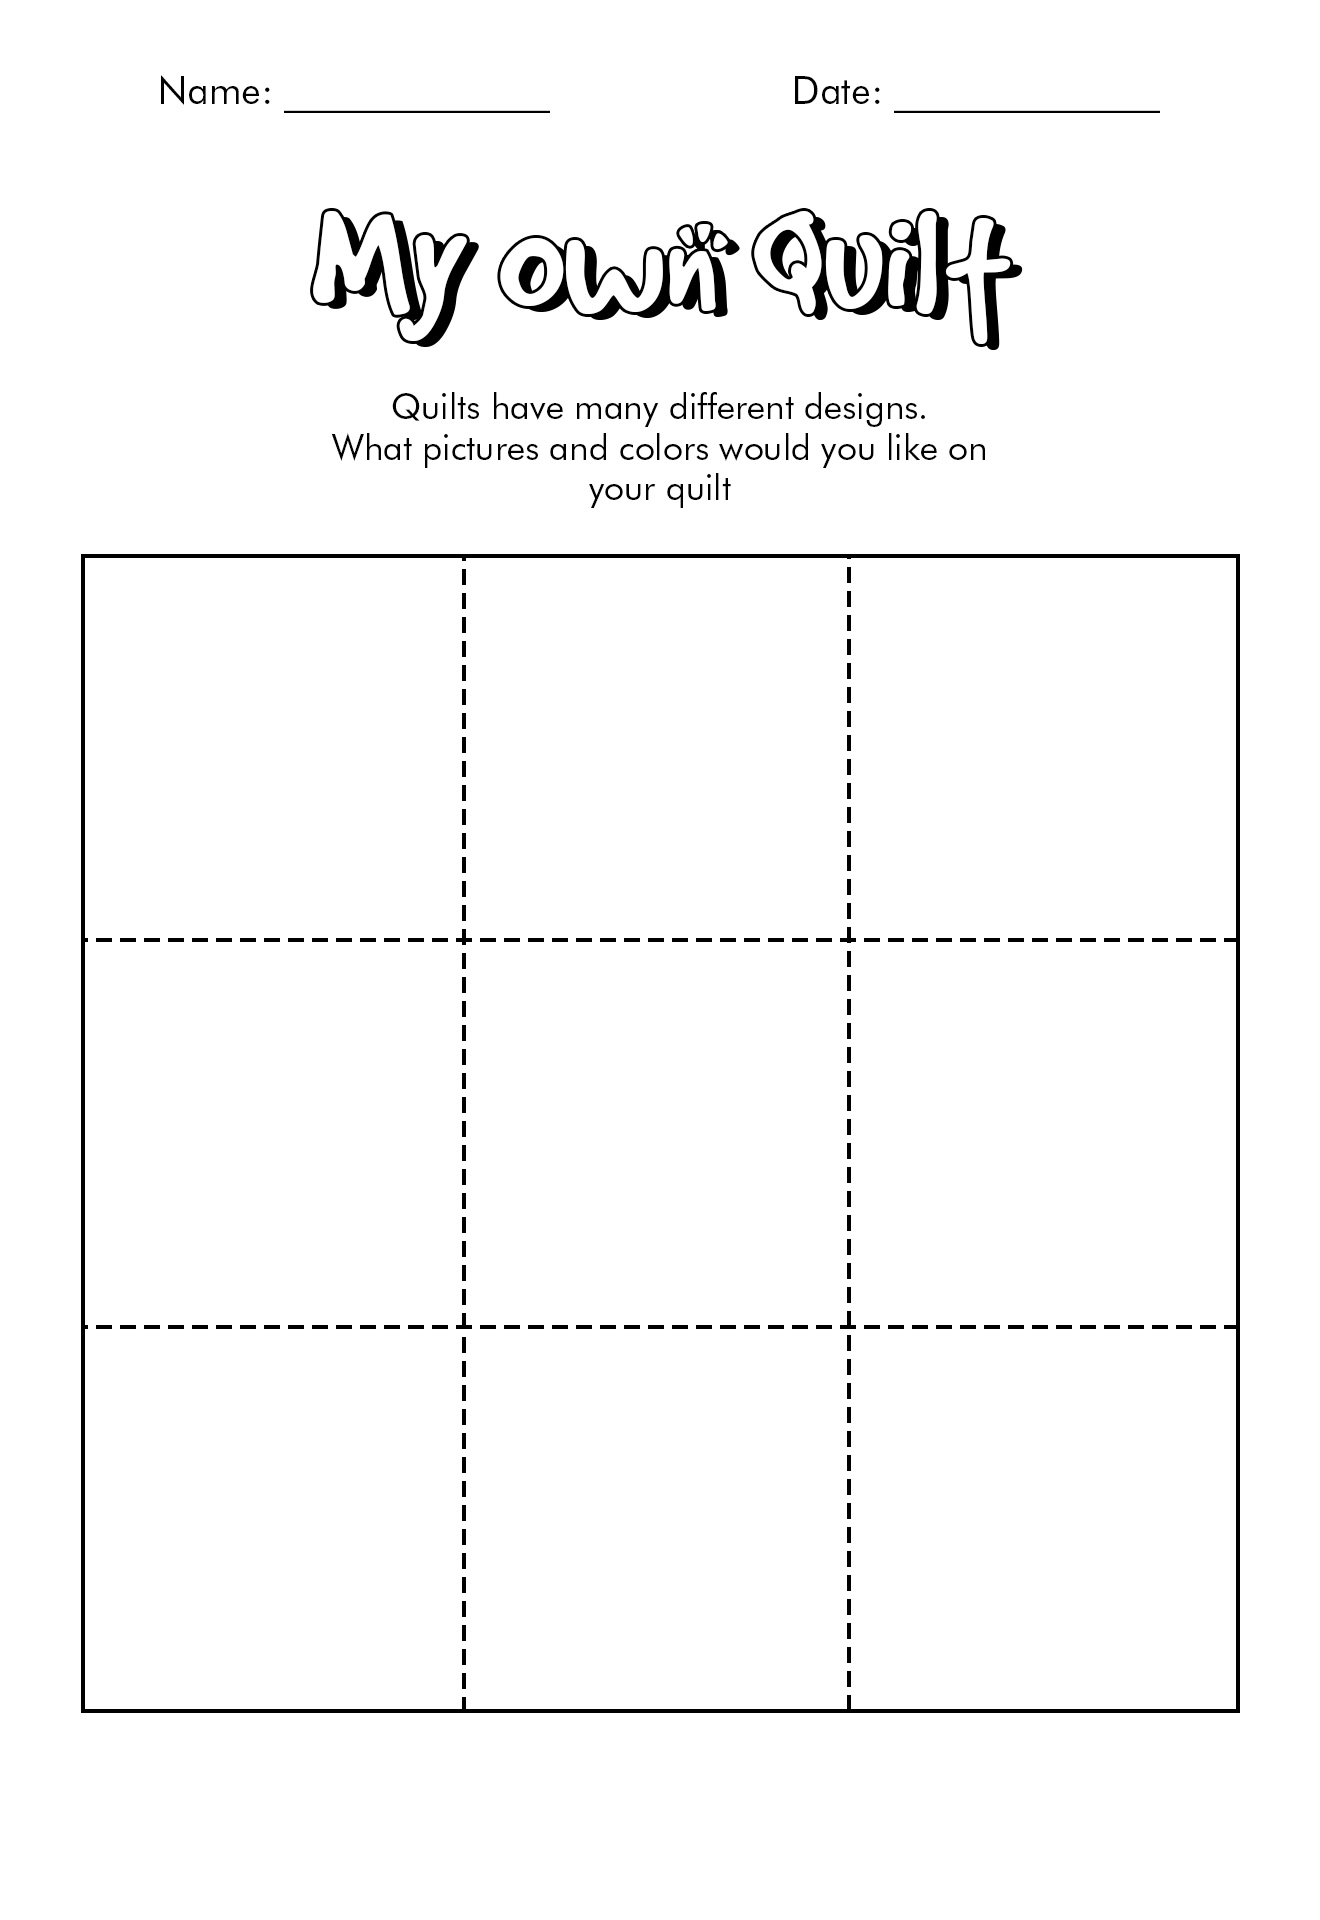 13-best-images-of-blank-quilt-worksheet-blank-quilt-square-template